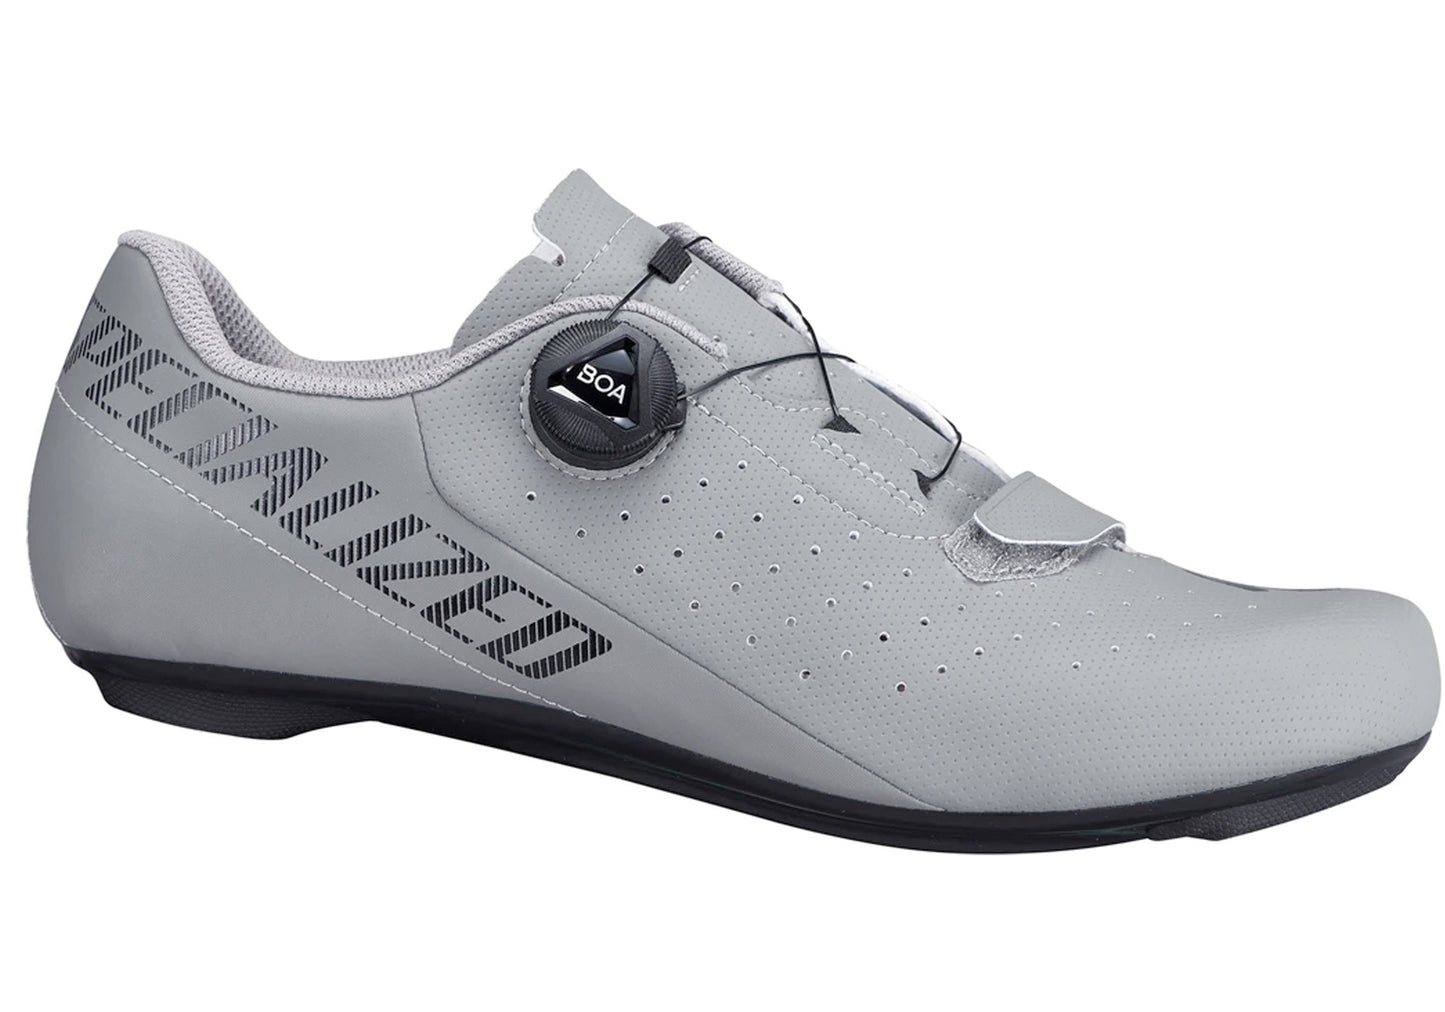 Specialized Torch 1.0 Mens Road Cycling Shoes, Slate/Cool Grey, buy online at Wool;ys Wheels